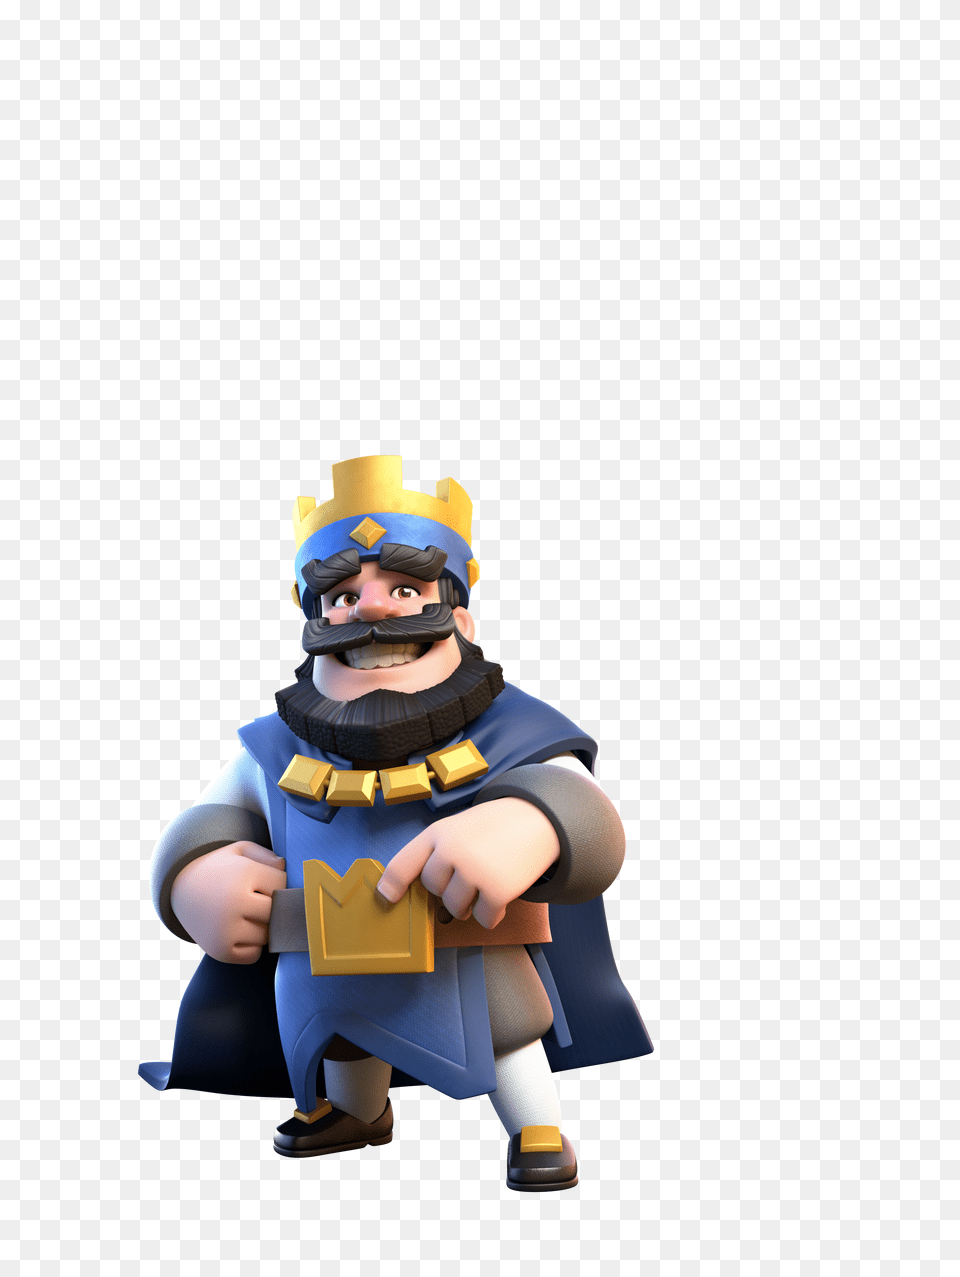 Clash Royale Apk And Play On Your Pc, Baby, Person, Figurine, Face Png